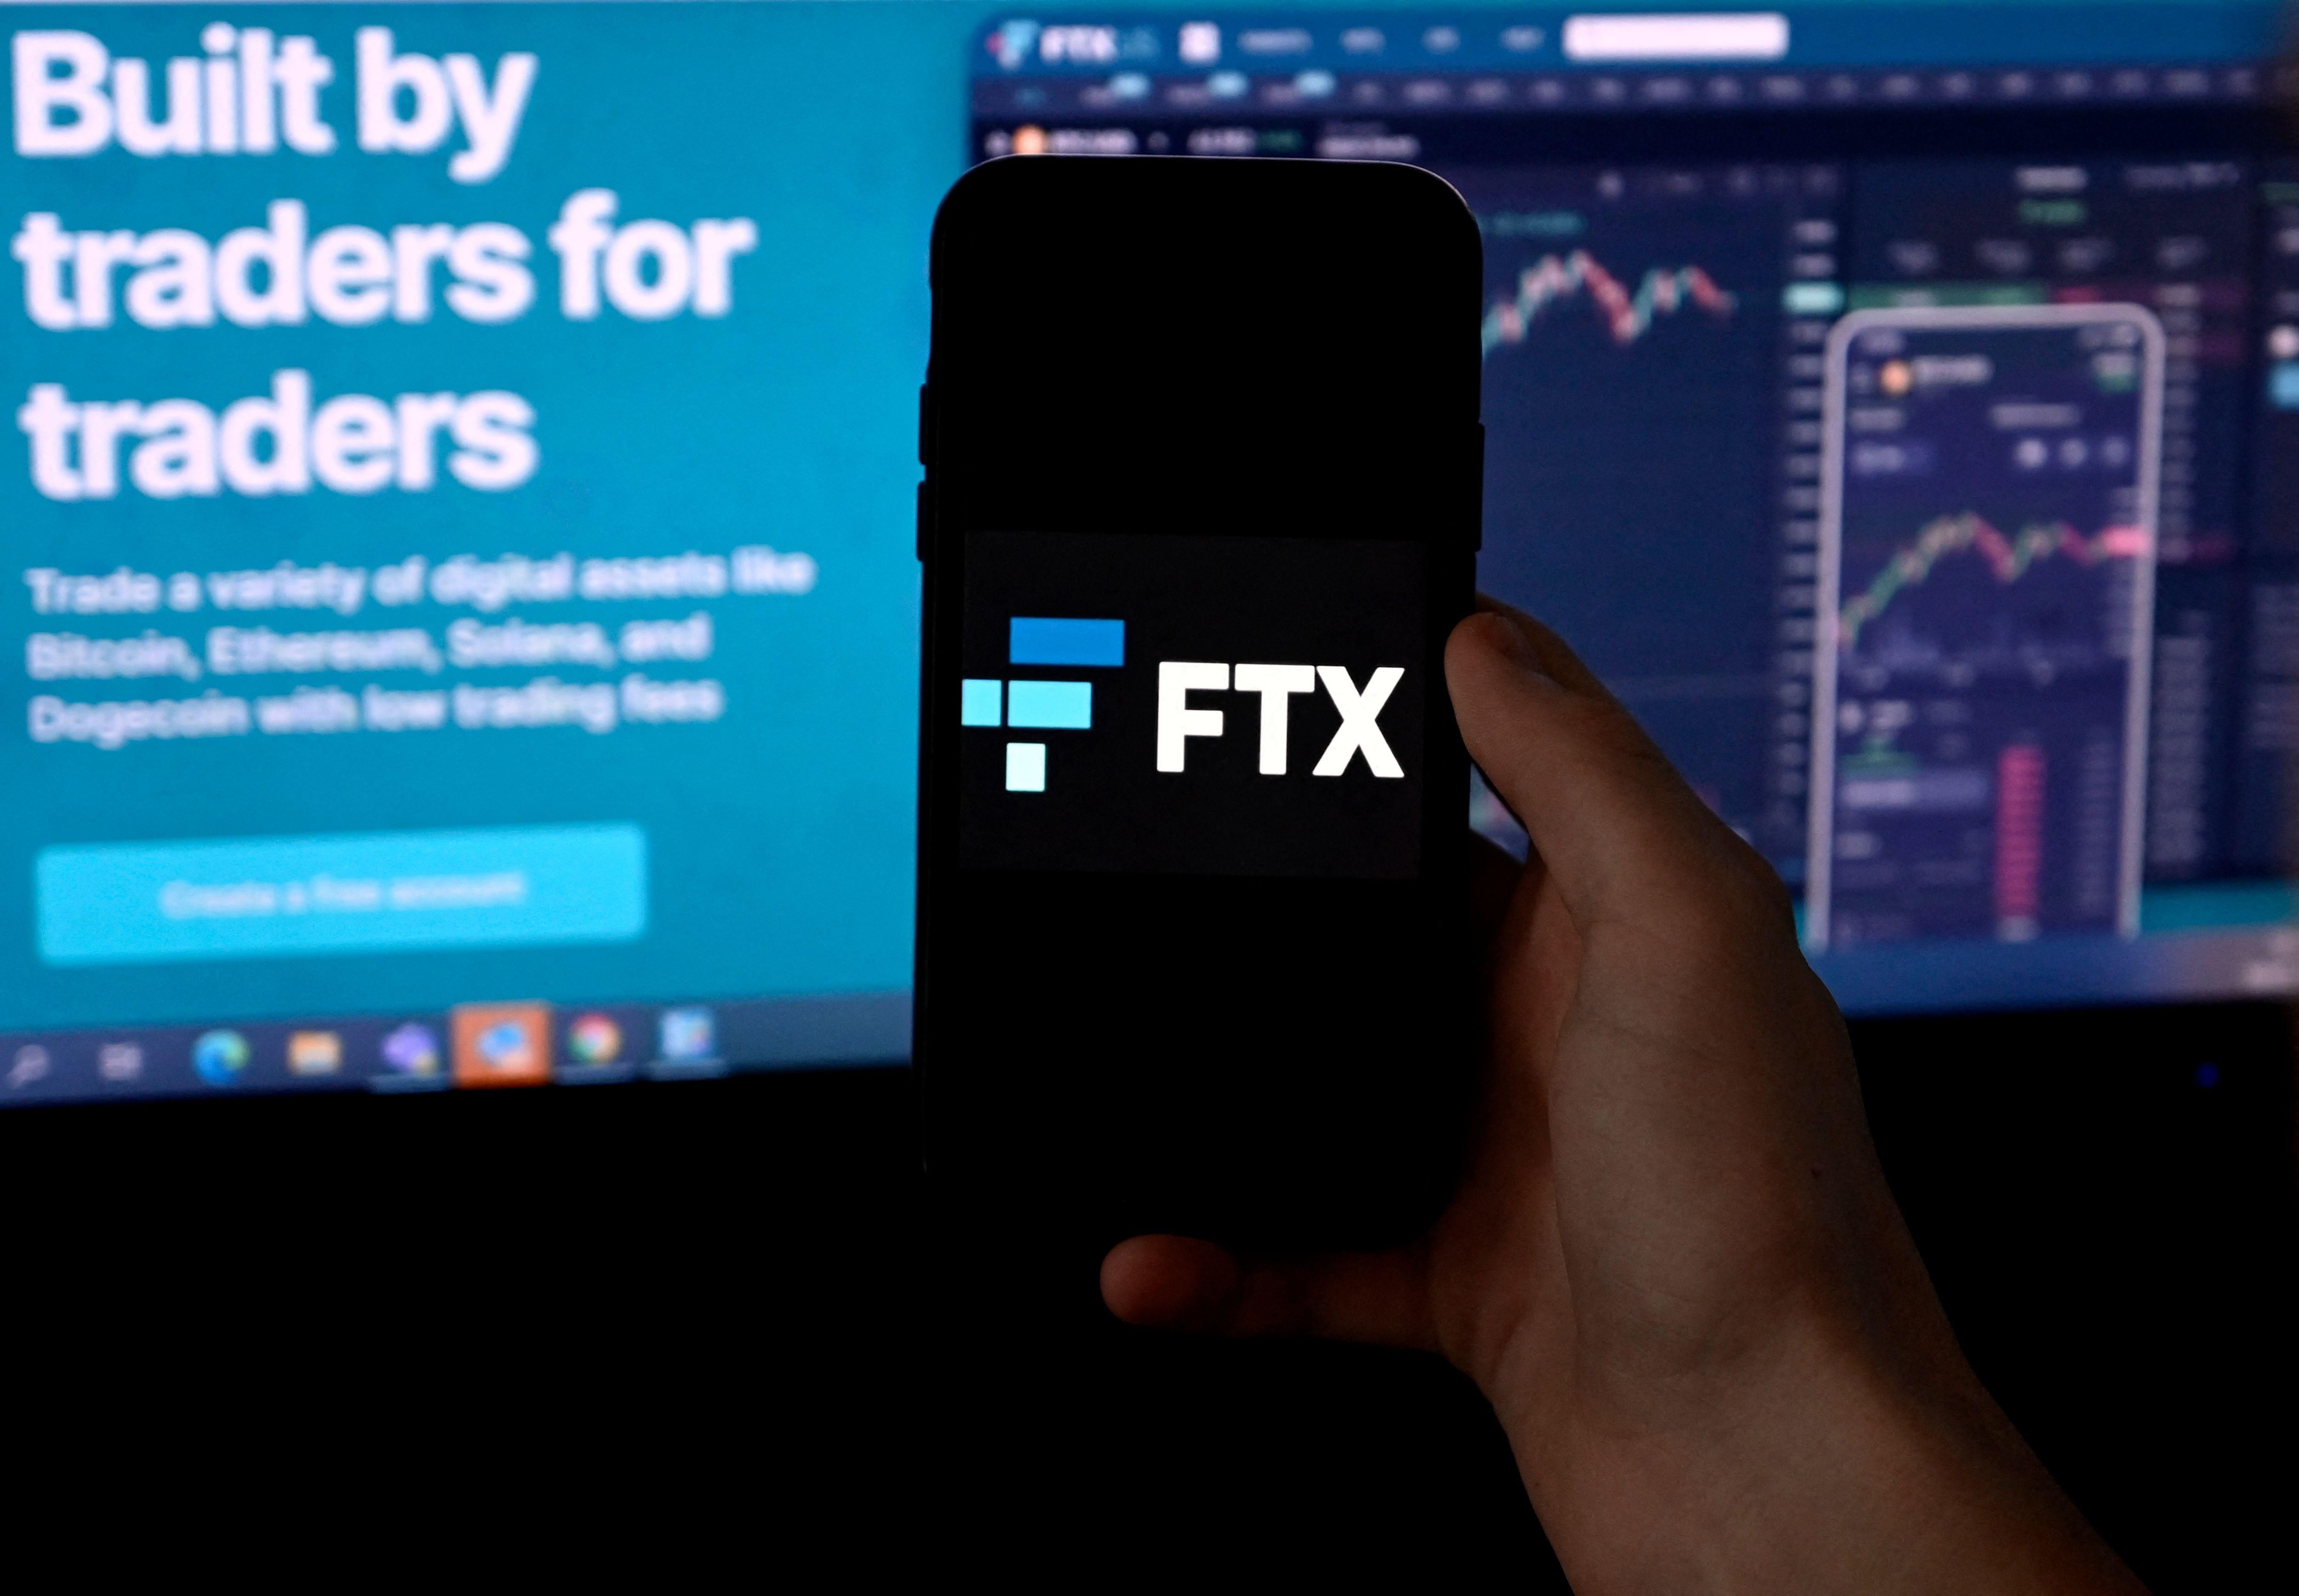 The logo of FTX, a cryptocurrency exchange platform, is shown on a smartphone screen in Arlington, Virginia on February 10, 2022.